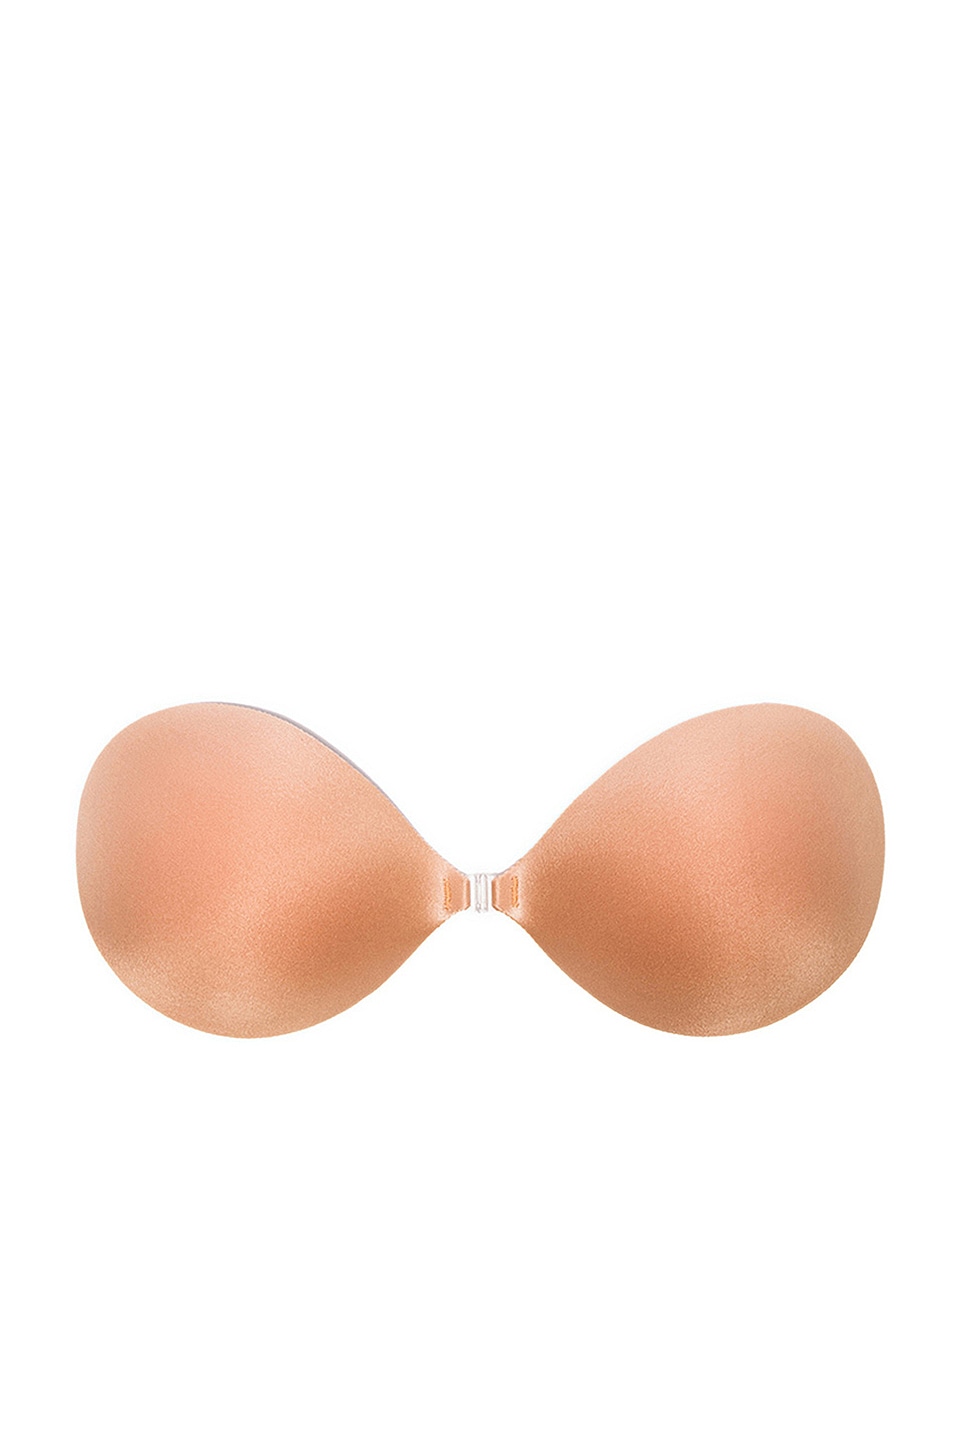 Strapless Push Up Bra, Invisible Silicone Seamless Nubra 